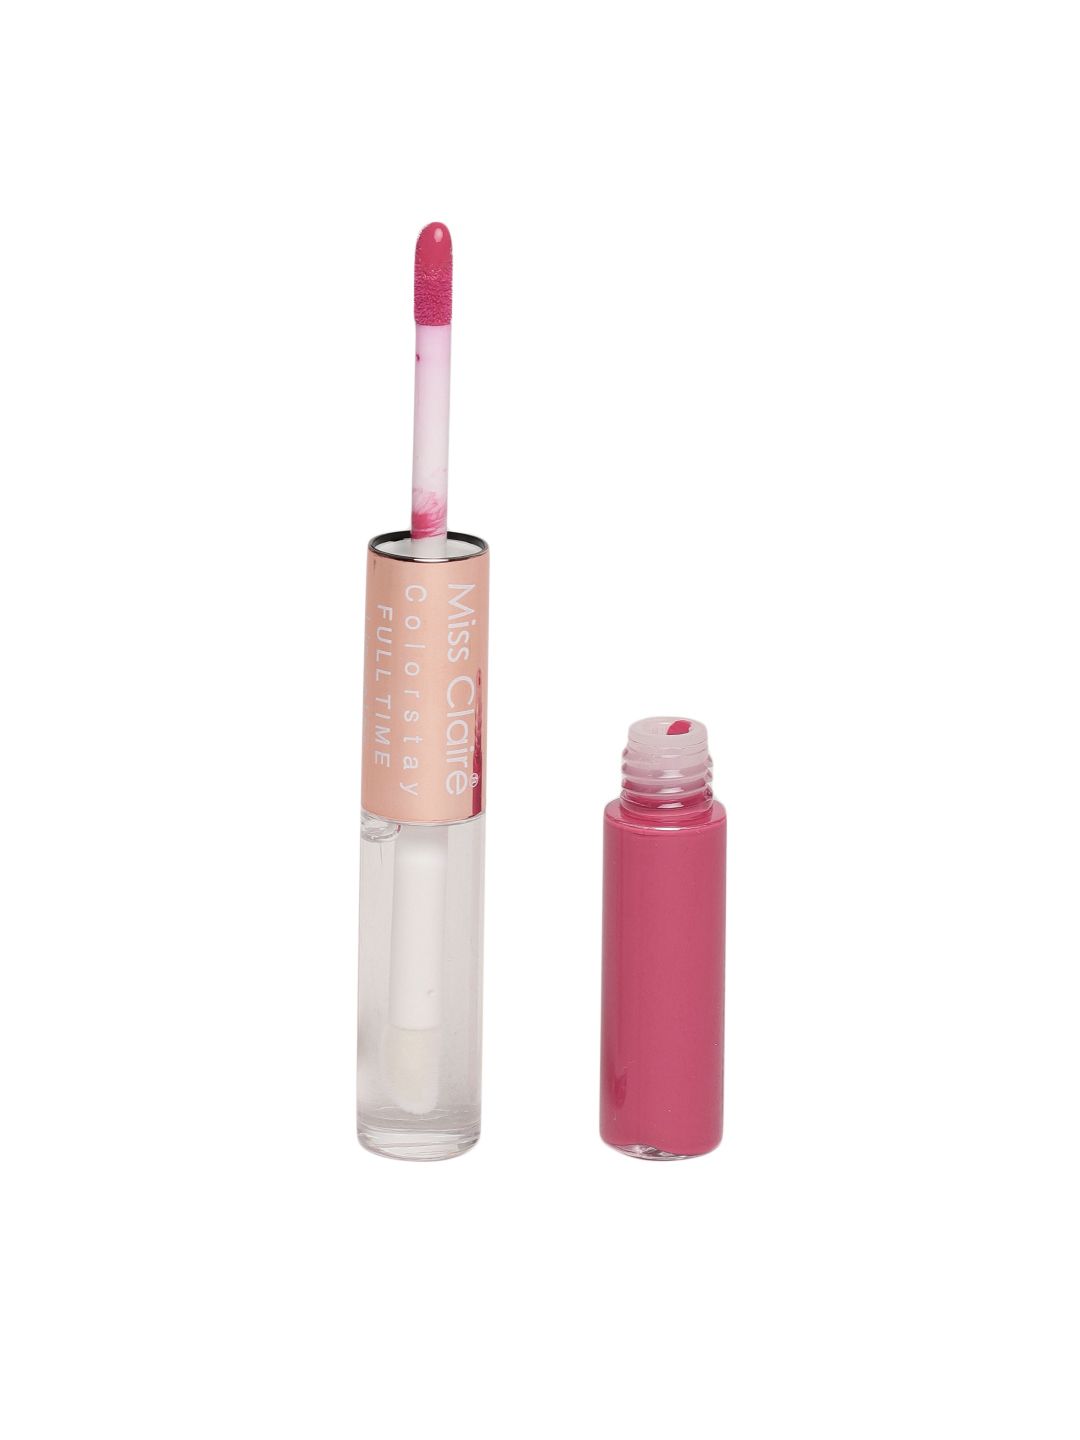 Miss Claire 23 Colorstay Full Time Lipcolor 10ml Price in India